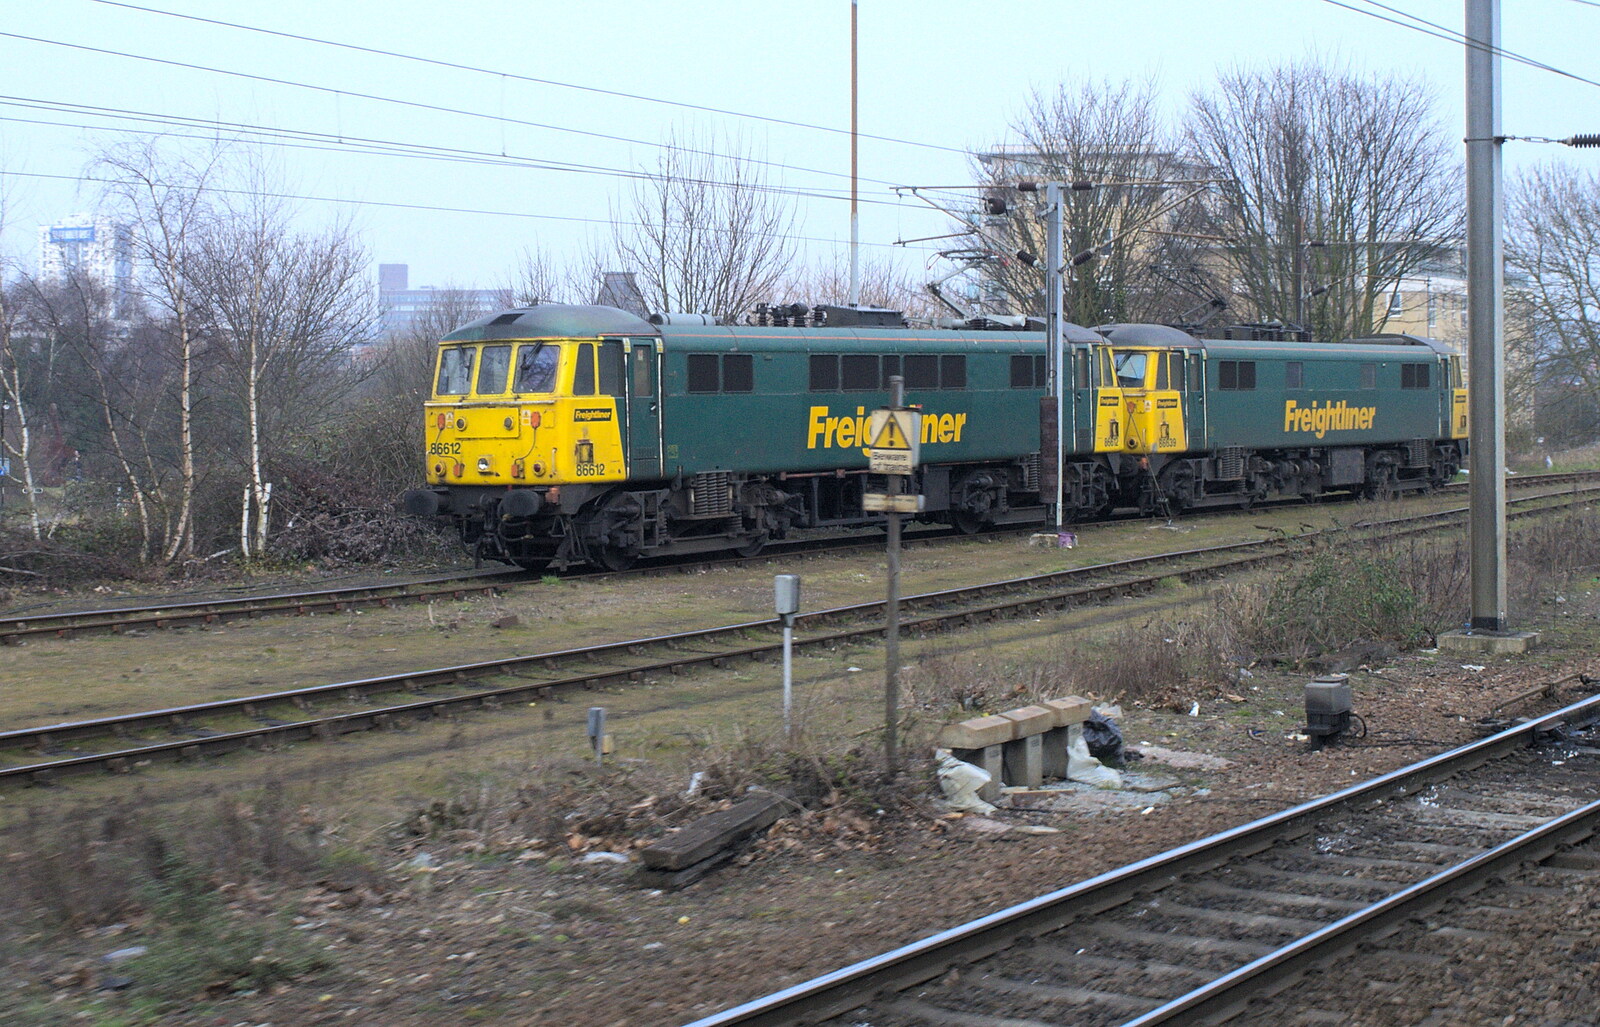 A pair of Class 86 locos, including 86612 from A Walk at Grandad's, Bramford Dereliction and BSCC at Yaxley, Eye, Suffolk - 2nd April 2013